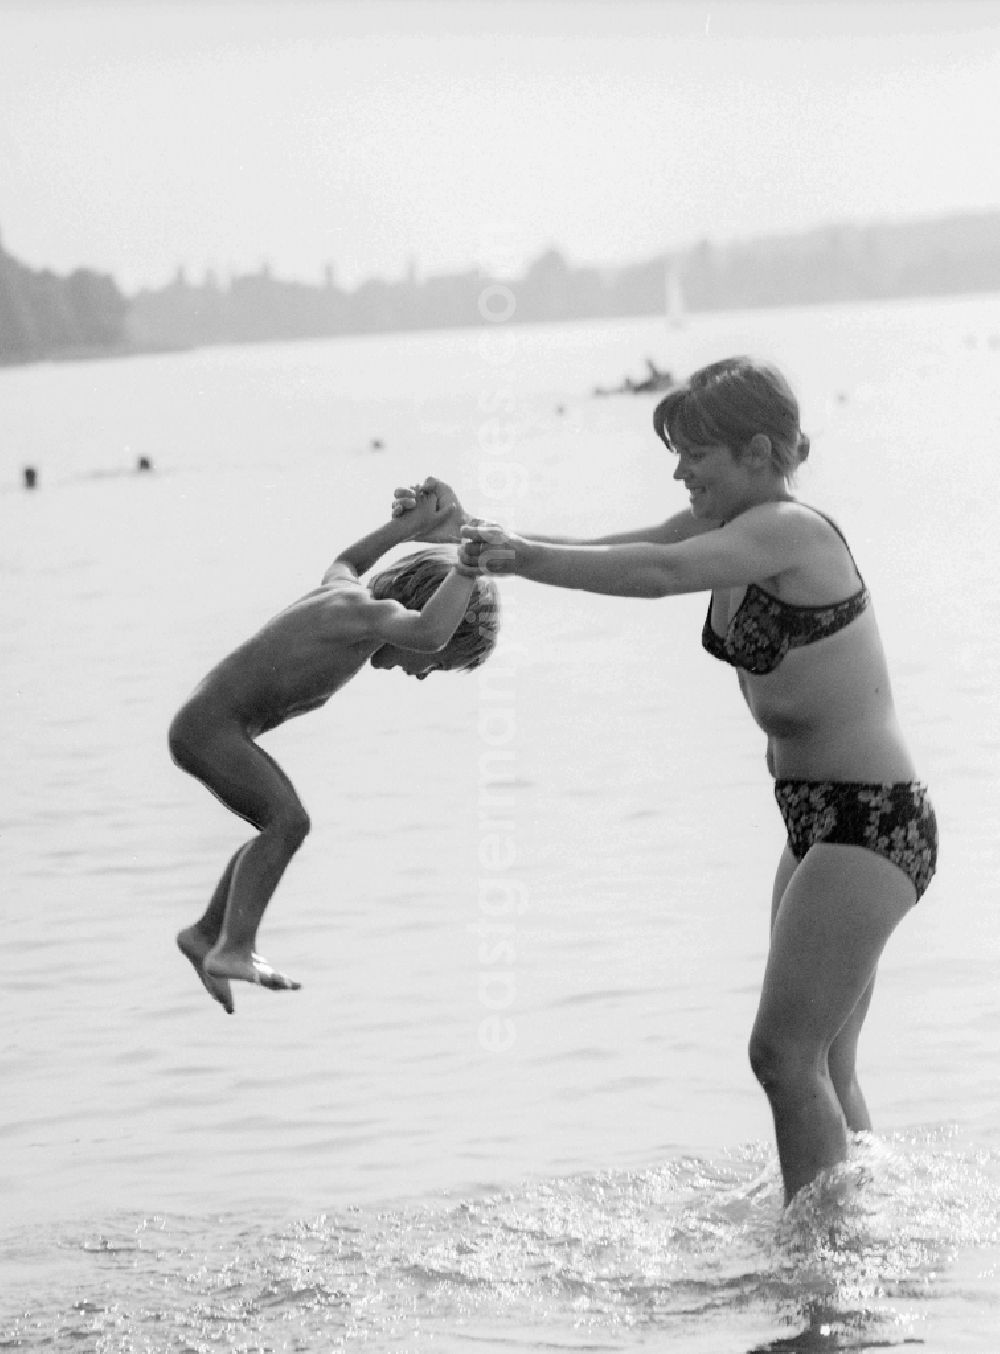 GDR image archive: Teupitz - Mother and child on Teupitzer lake in Teupitz in Brandenburg on the territory of the former GDR, German Democratic Republic